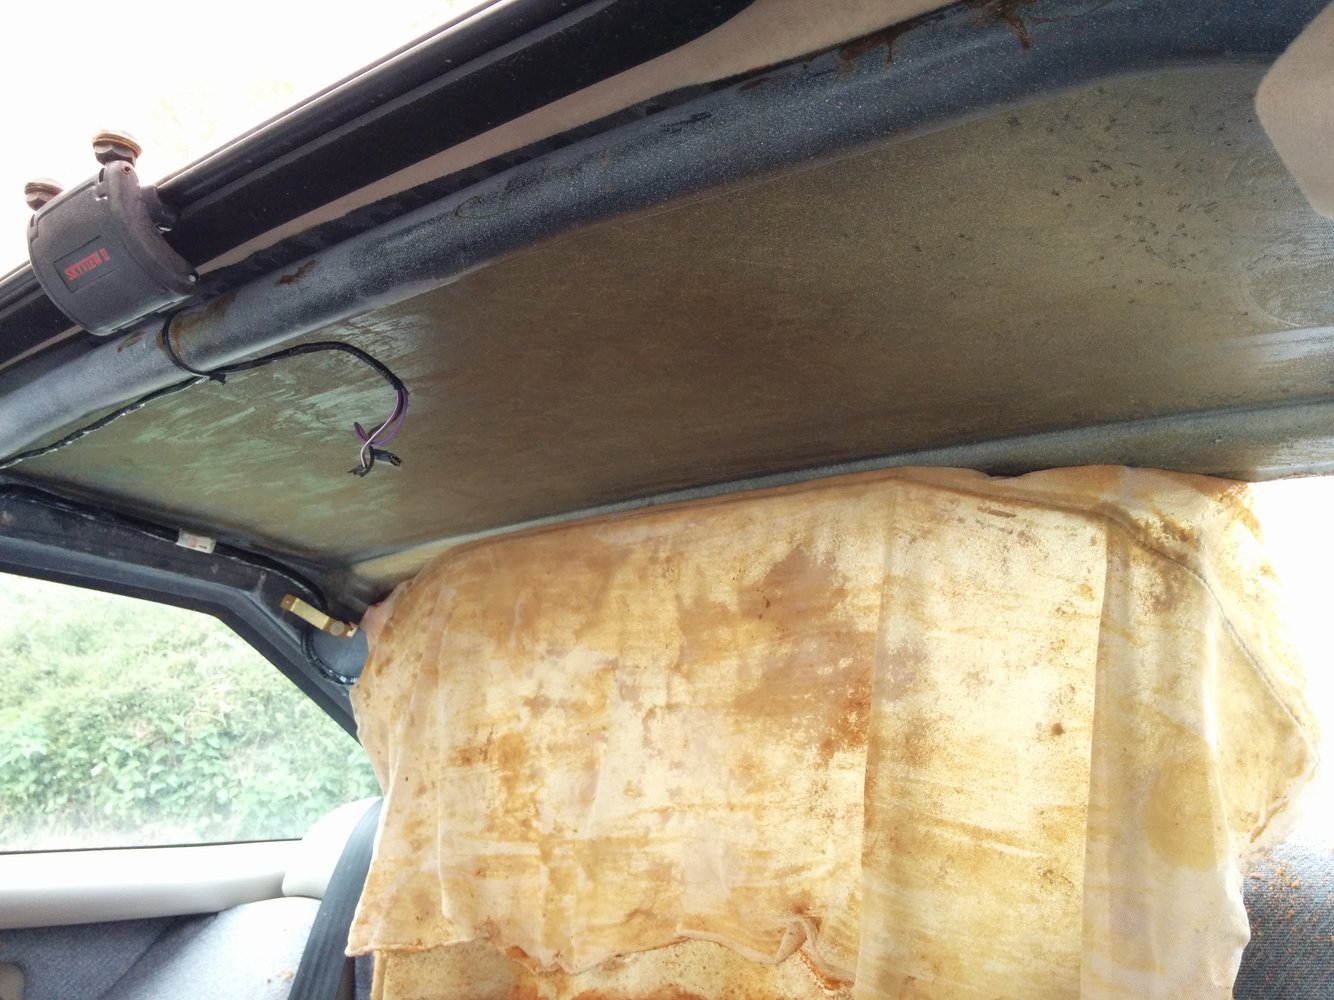 Headliner glue review - Land Rover Forums - Land Rover Enthusiast Forum